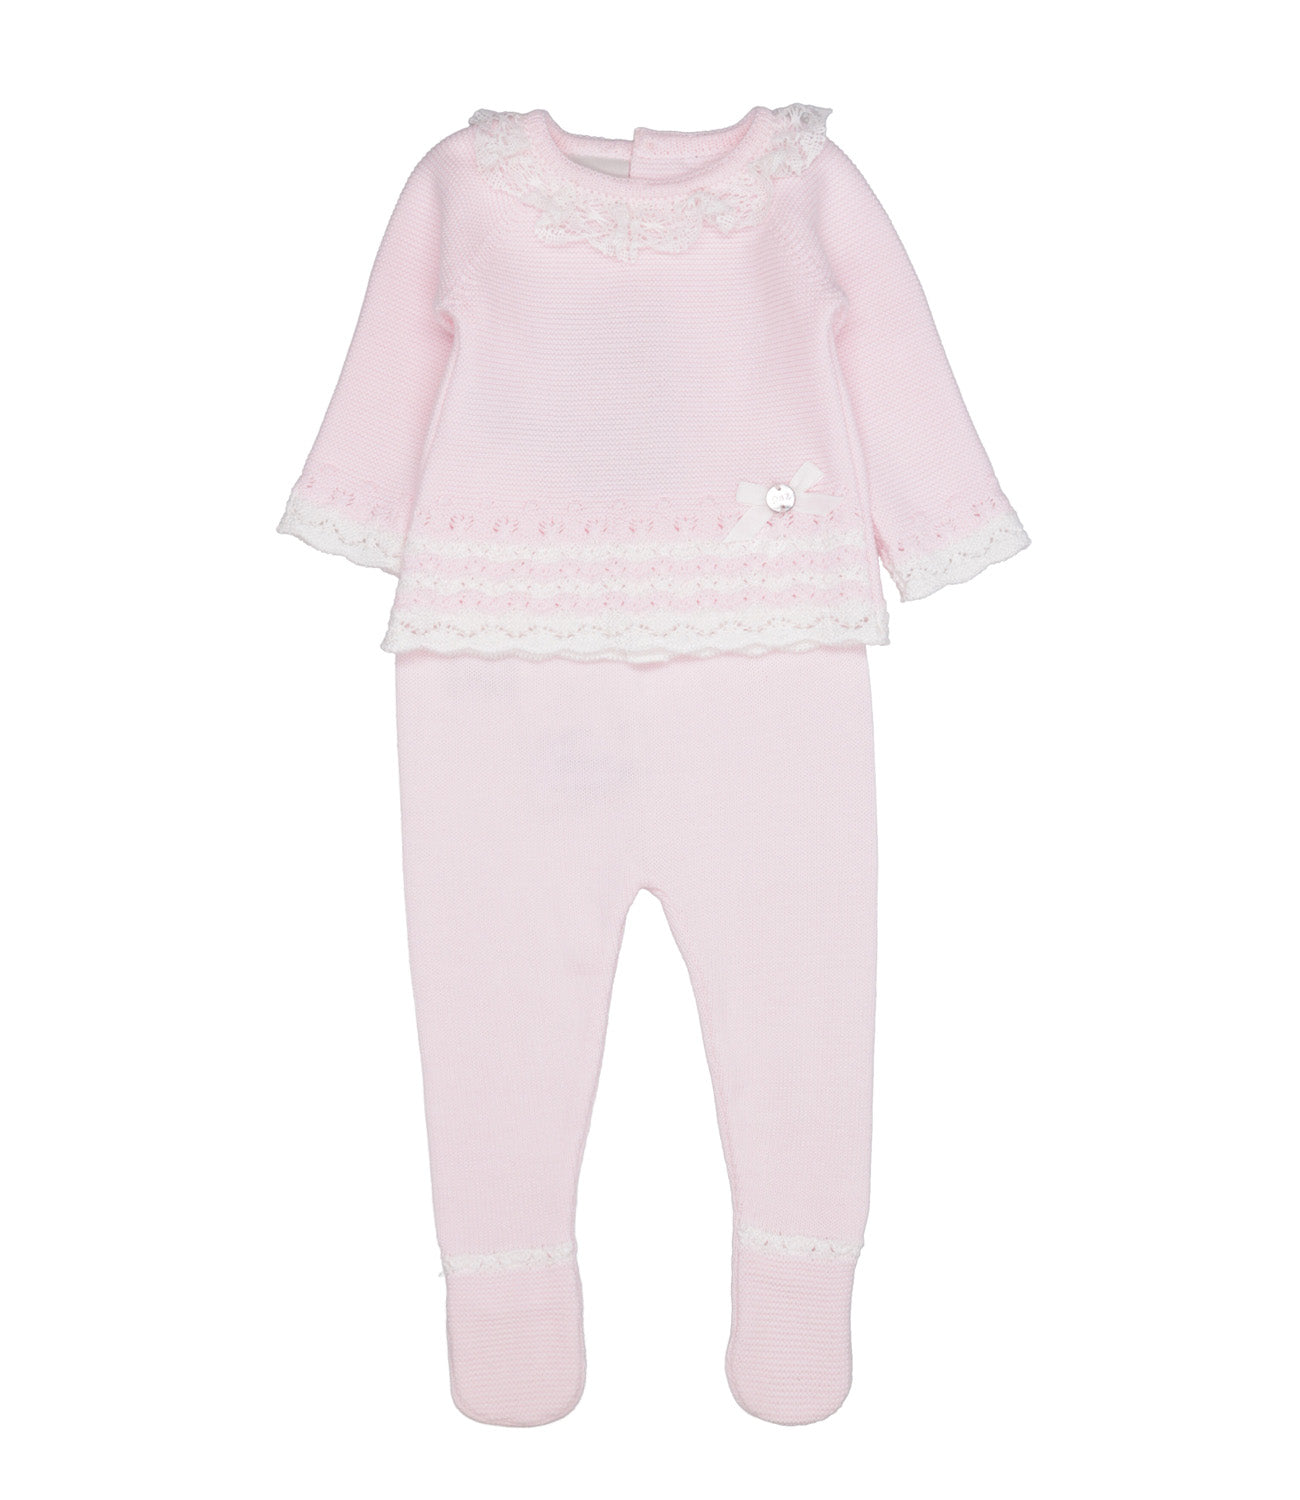 Paz Rodriguez | Pink Sweater and Pant Set